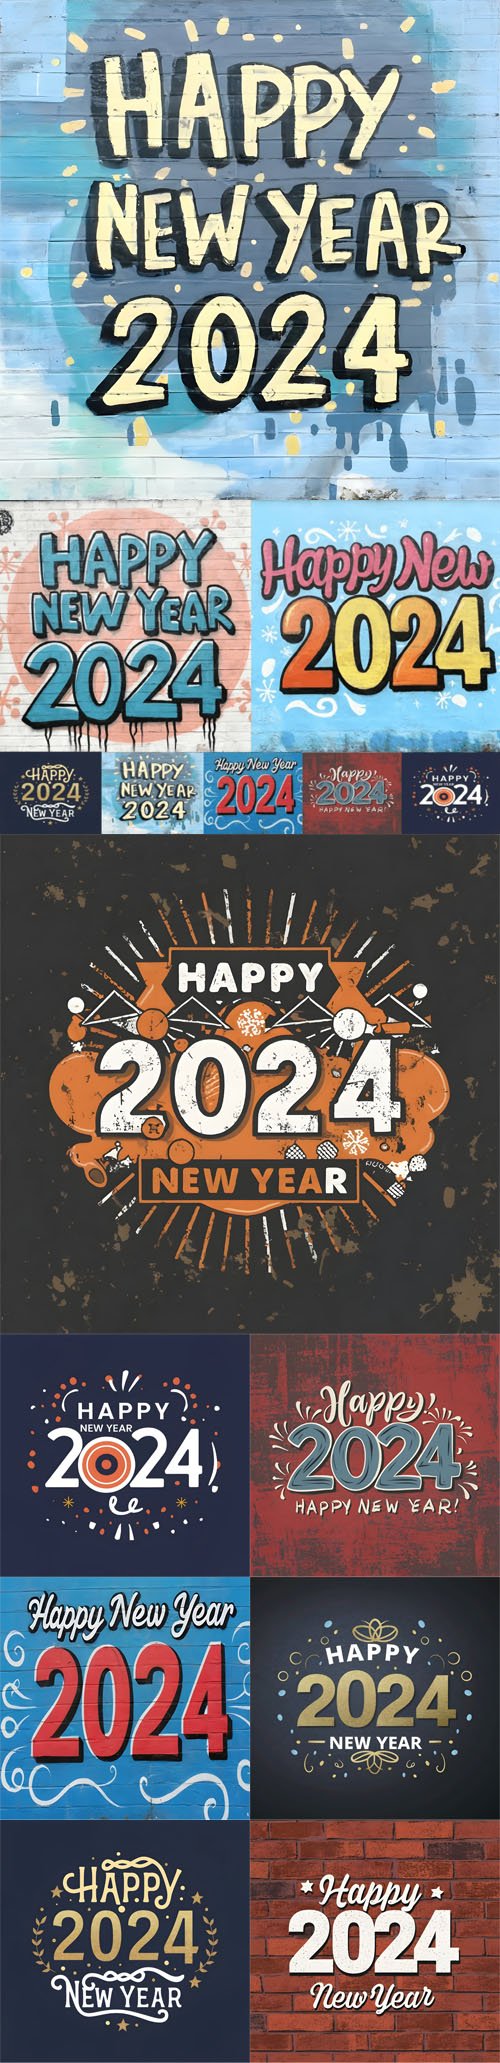 10 Happy New Year 2024 Backgrounds Pack